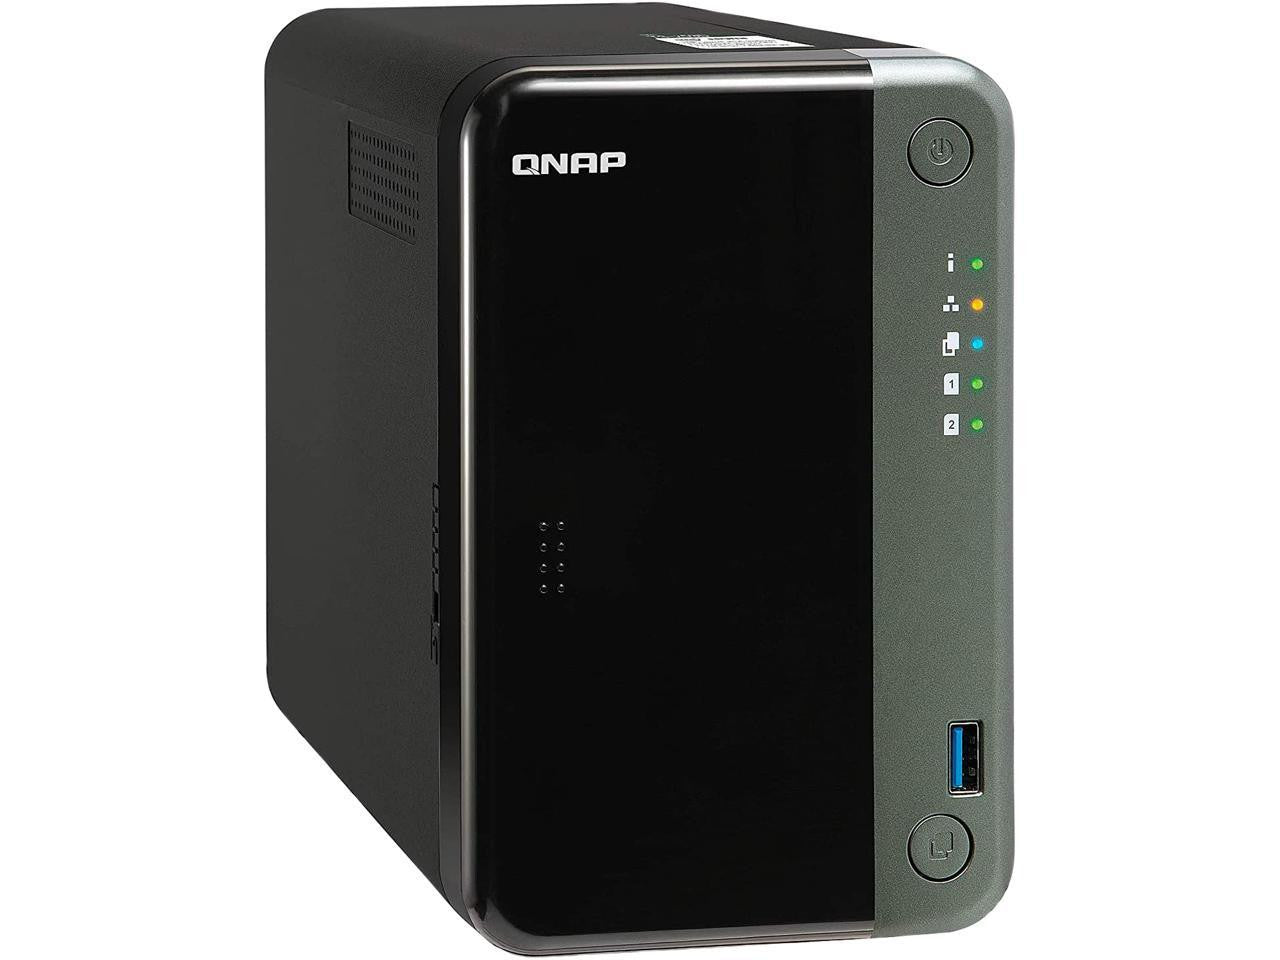 QNAP TS-253D Quad Core 2.7Ghz 2-Bay NAS with 4GB RAM and 16TB (2 x 8TB) of Seagate Ironwolf NAS Drives Fully Assembled and Tested By CustomTechSales